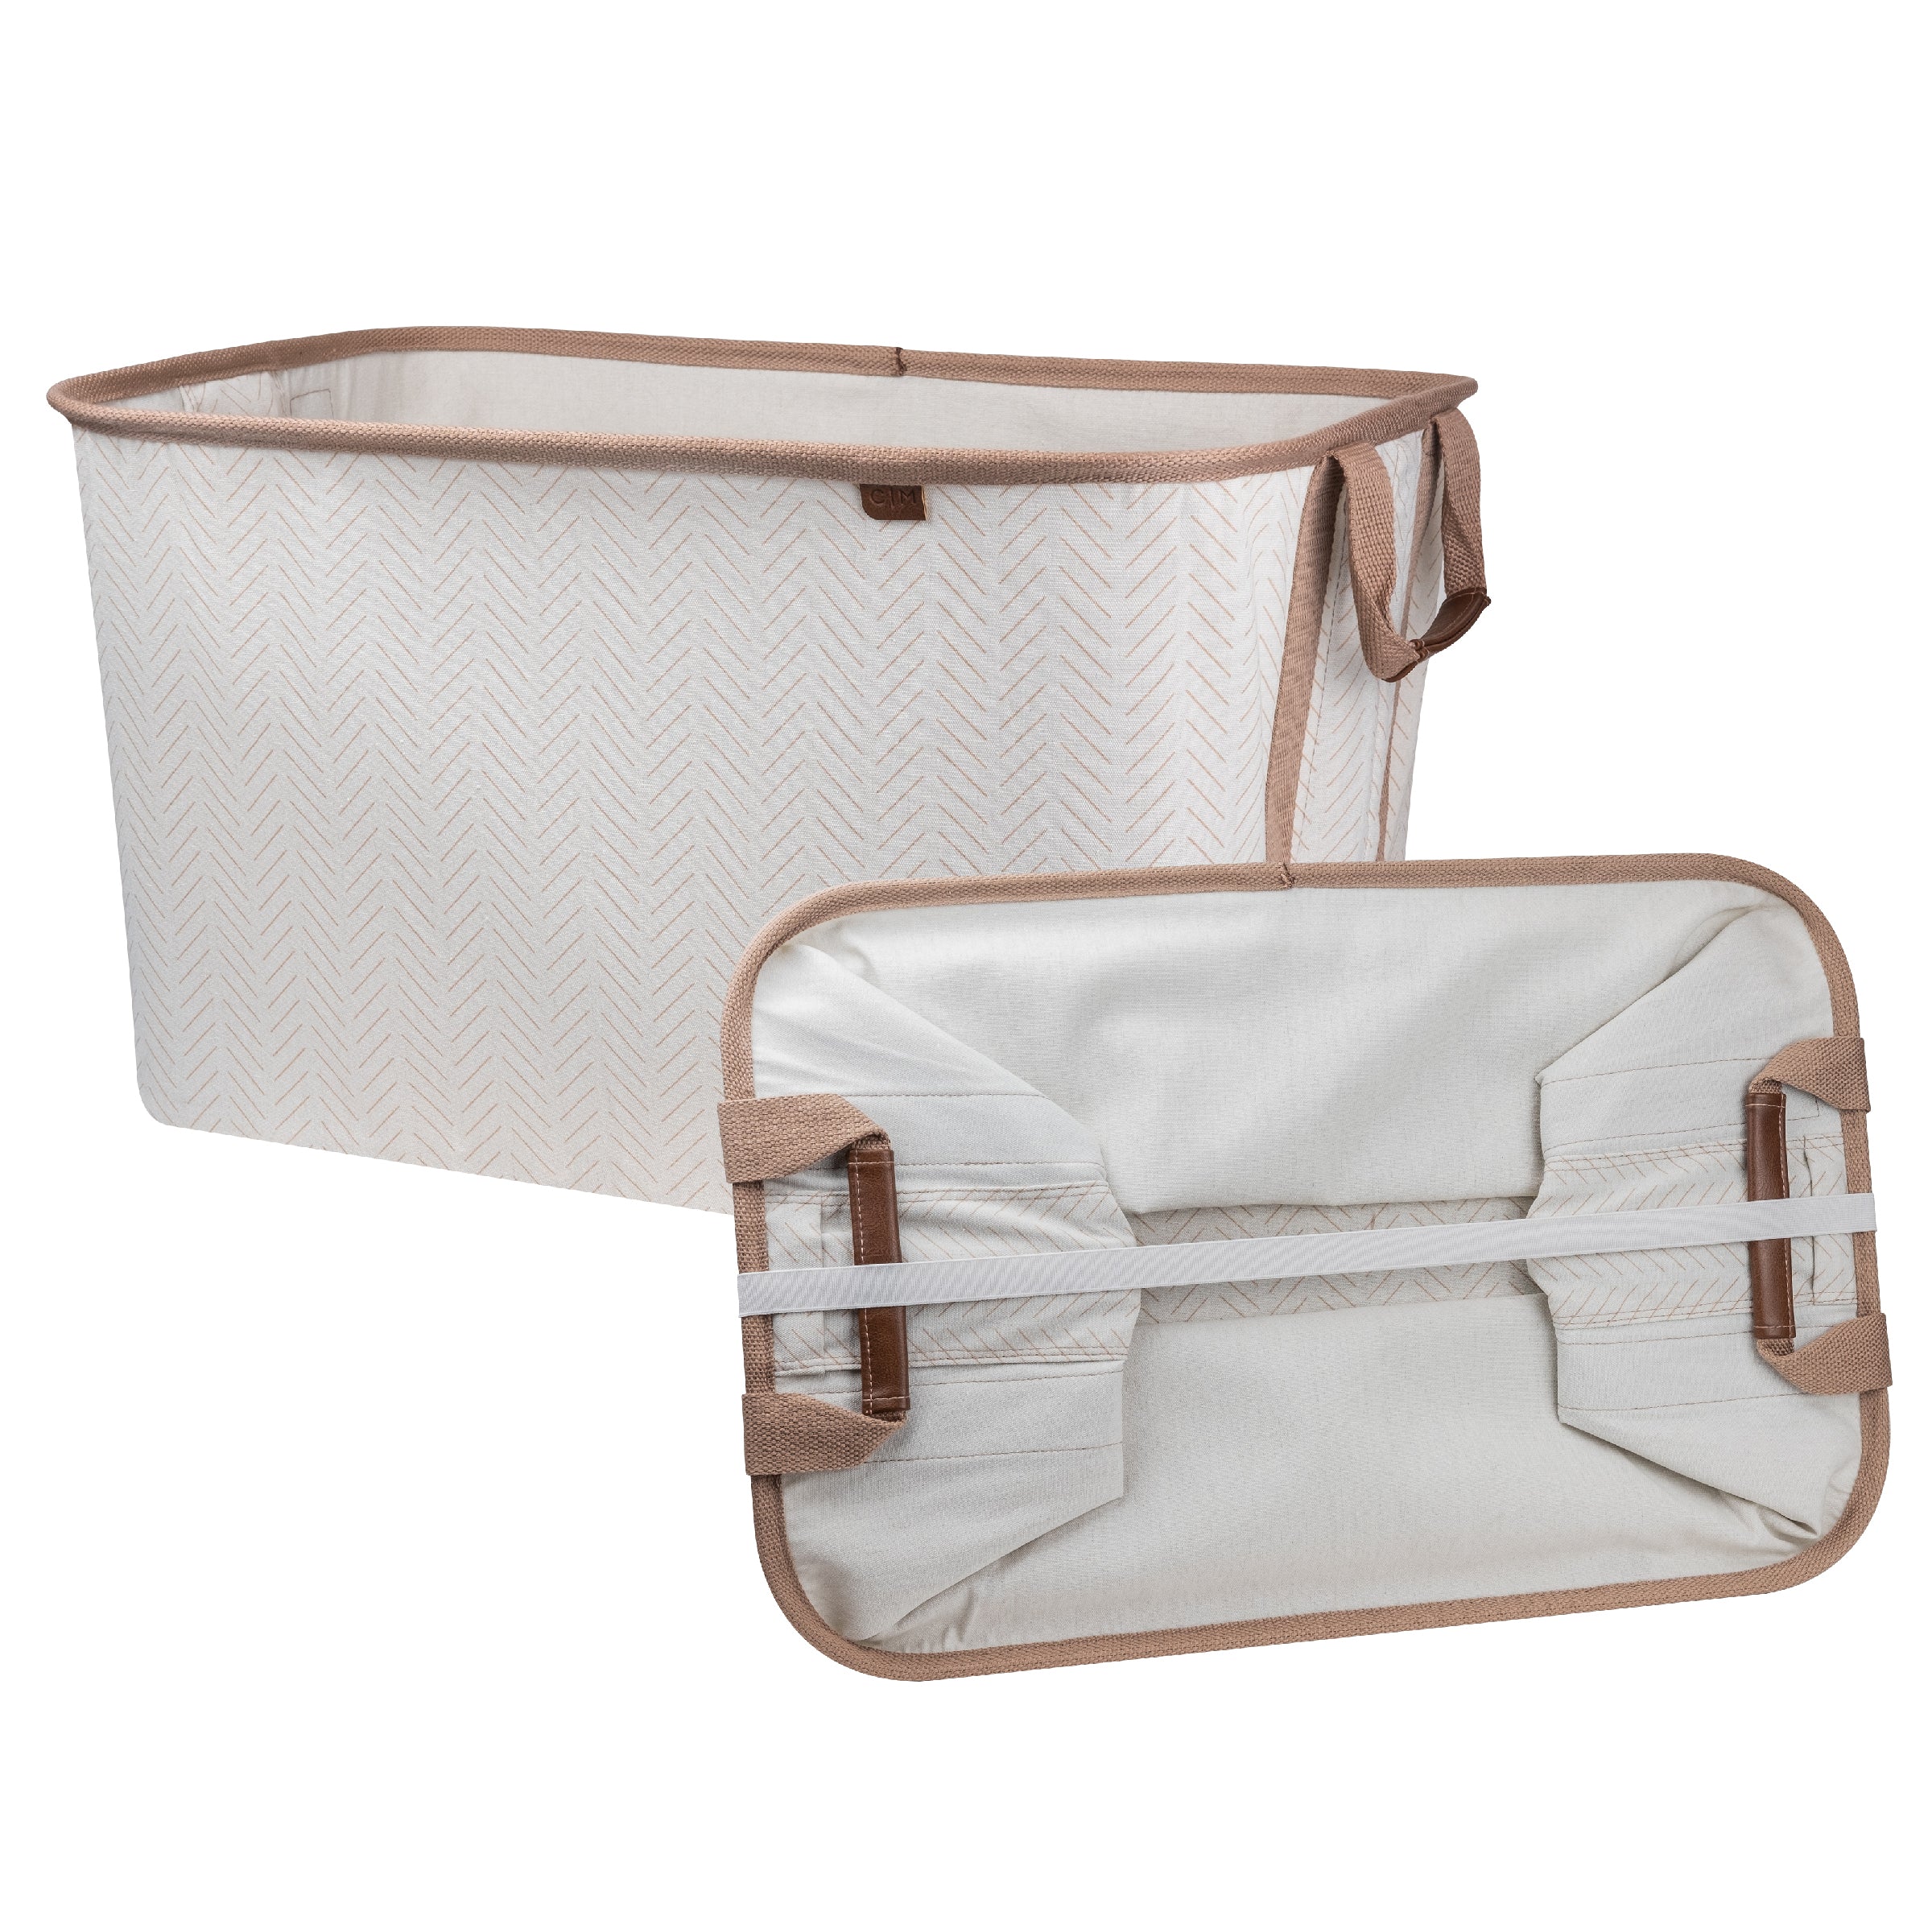 Clevermade Collapsible Laundry Caddy with Divider